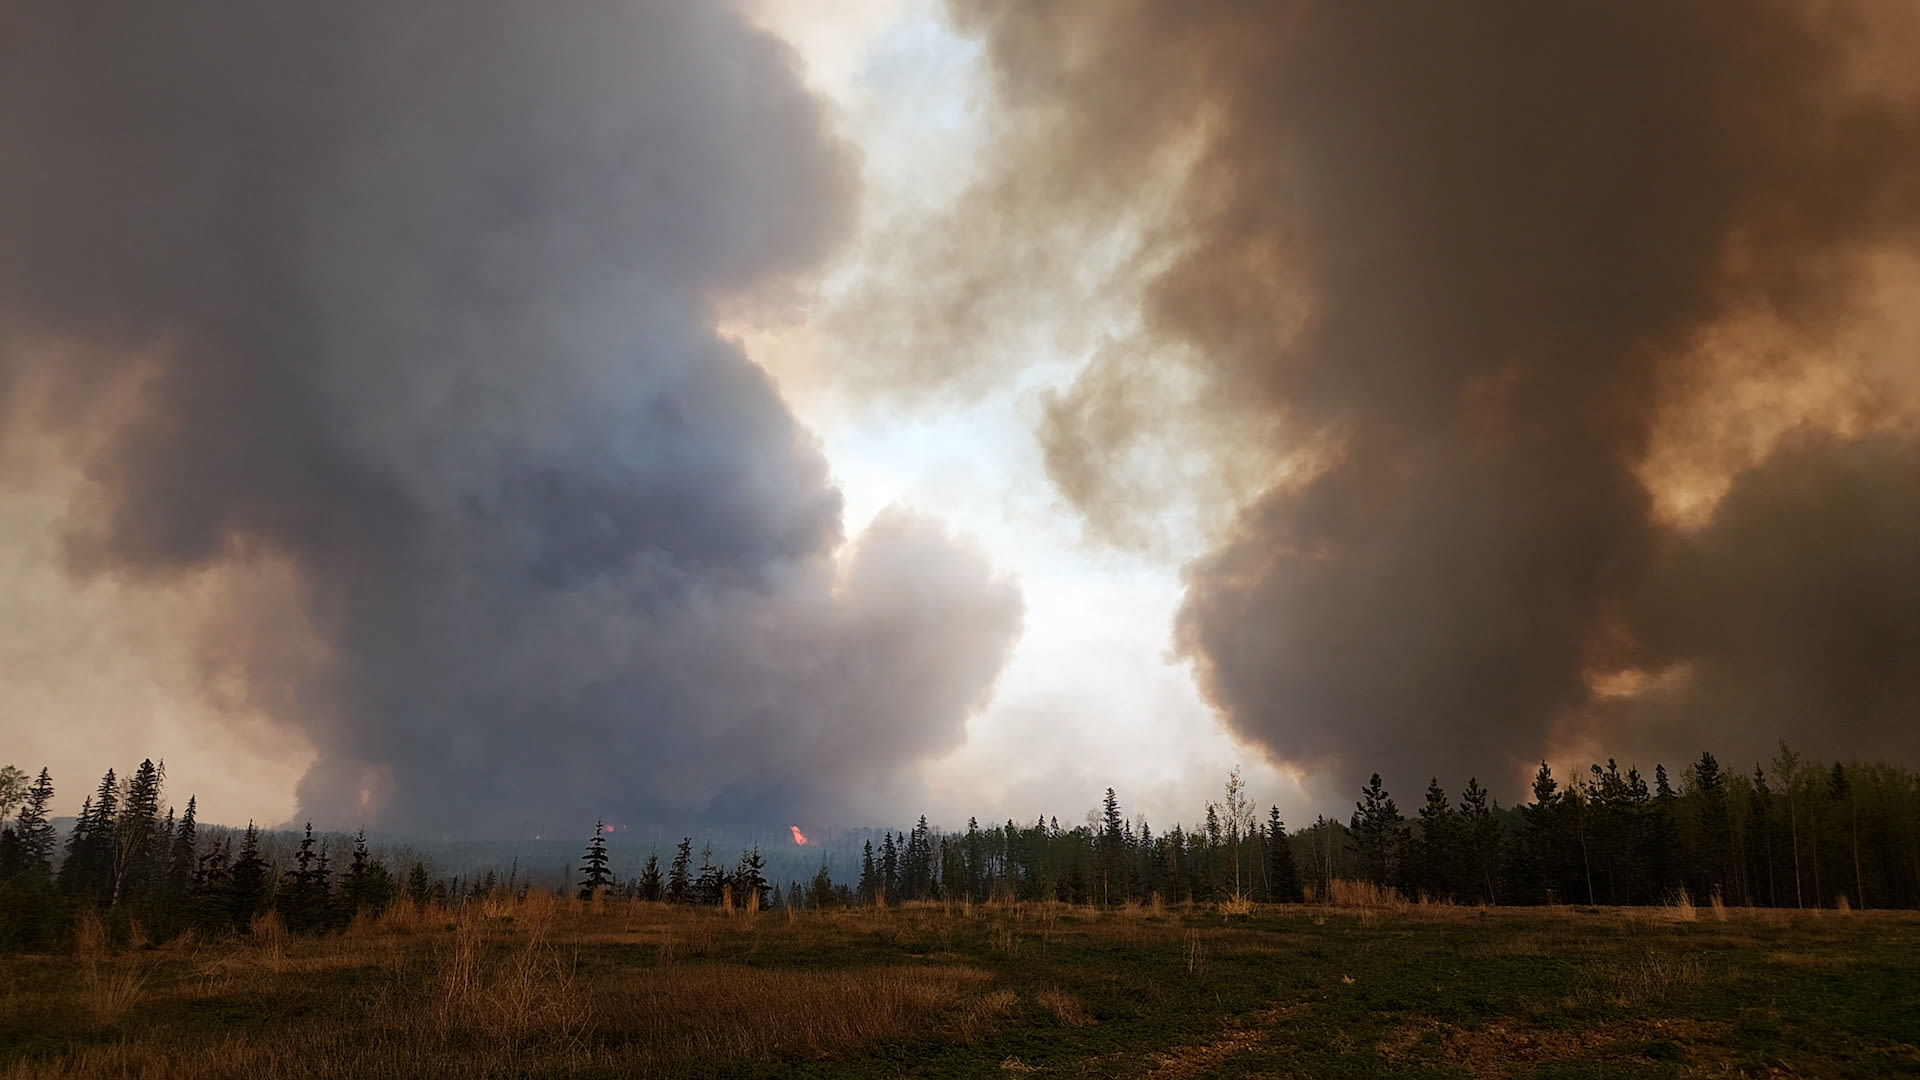 Best practices to keep yourself safe from wildfire smoke